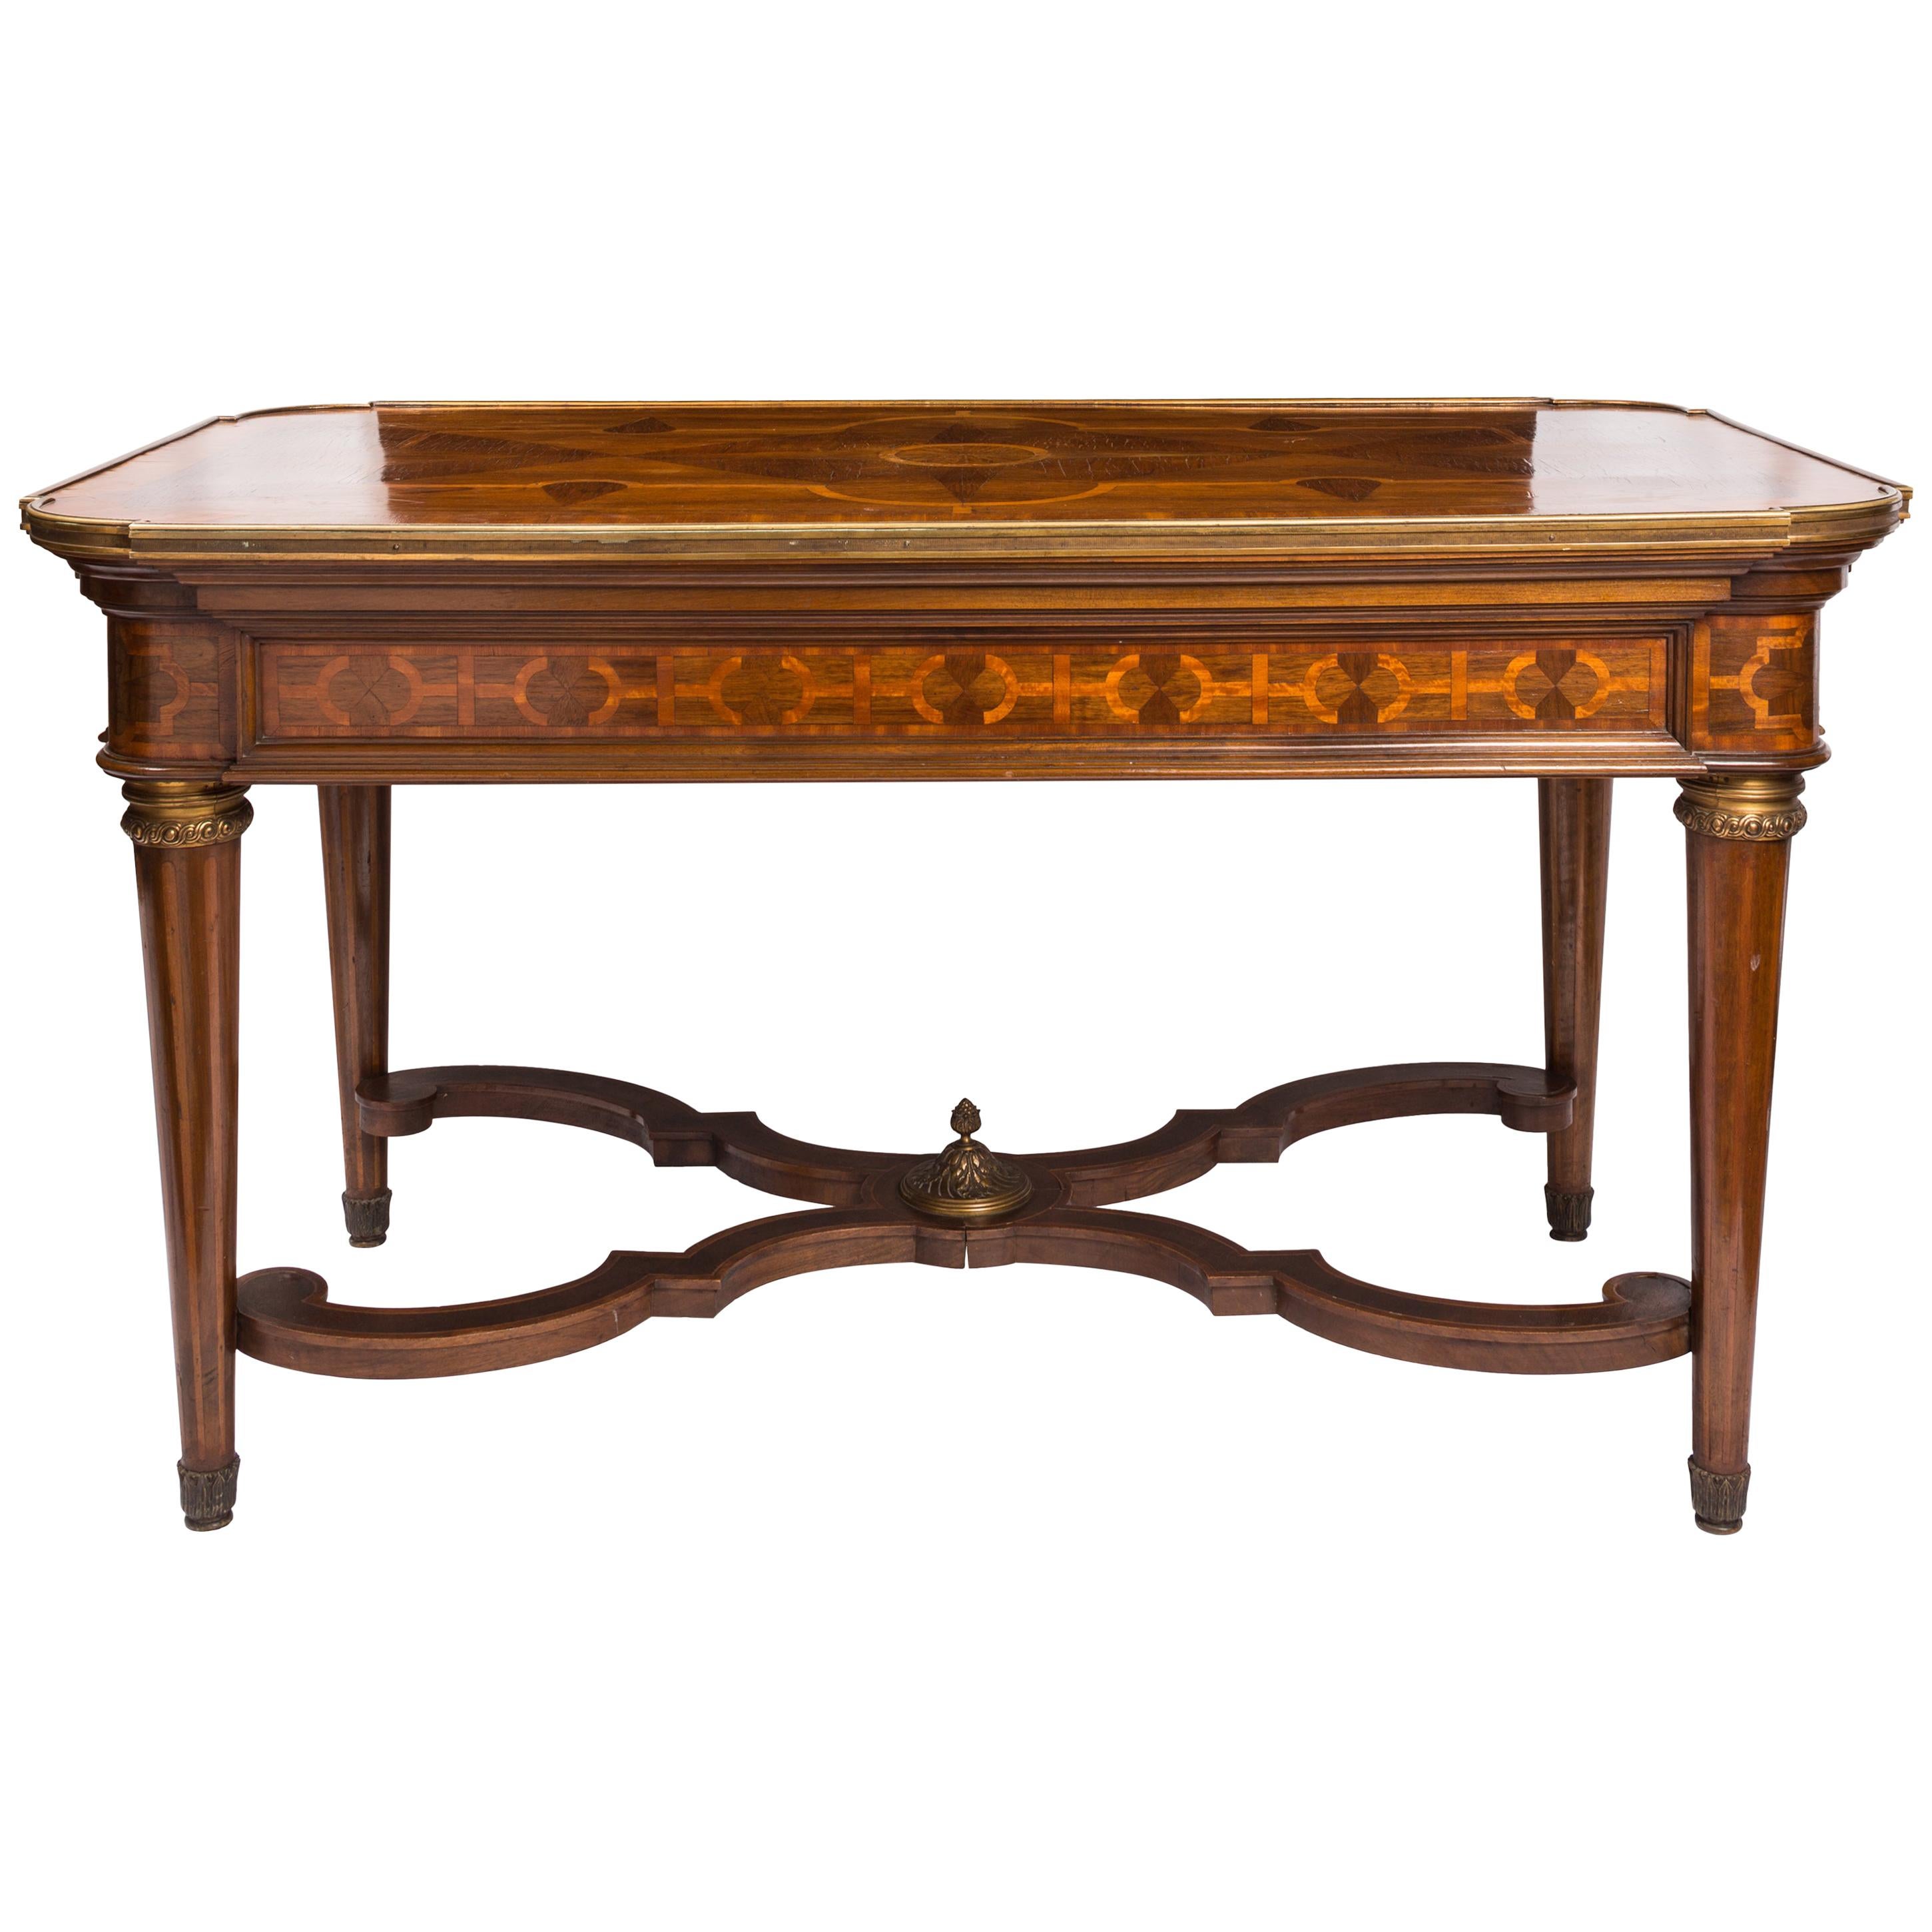 Louis XVI Style Table with Geometric Wood Marquetry and Brass Detailing